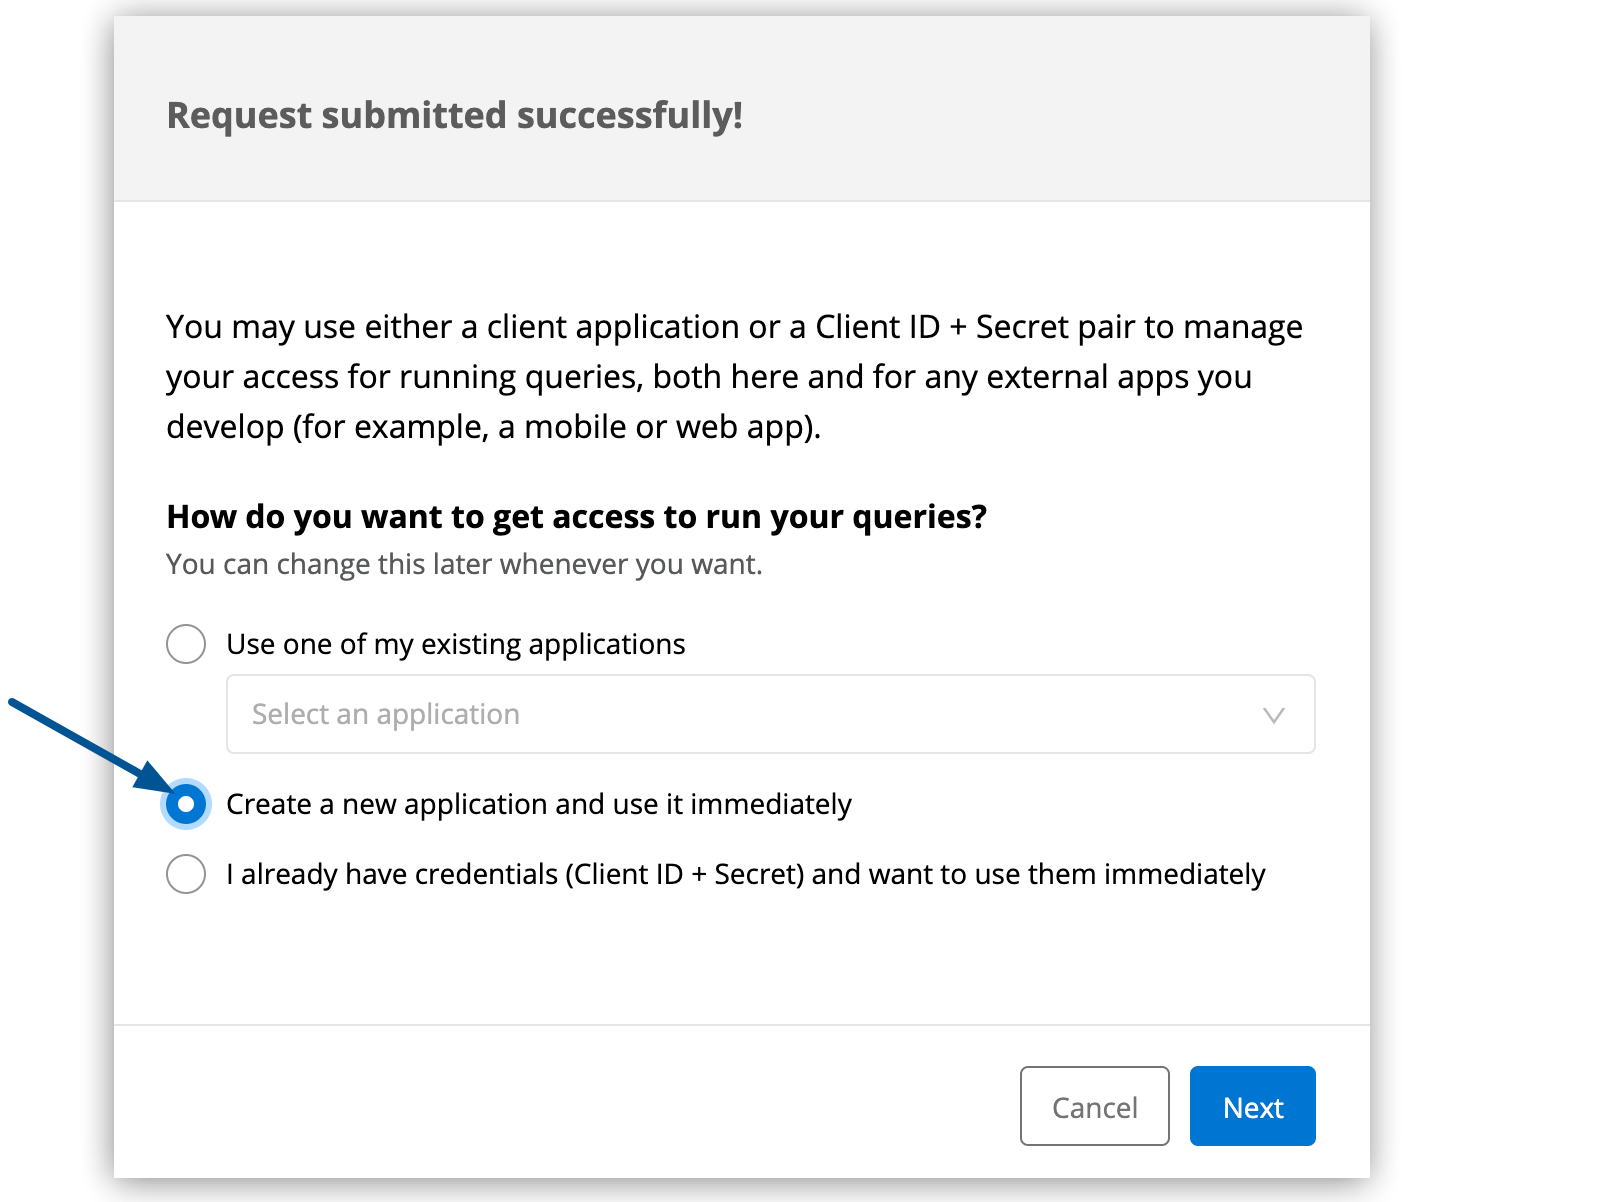 Create a new application is selected in requesting access to run an operation window